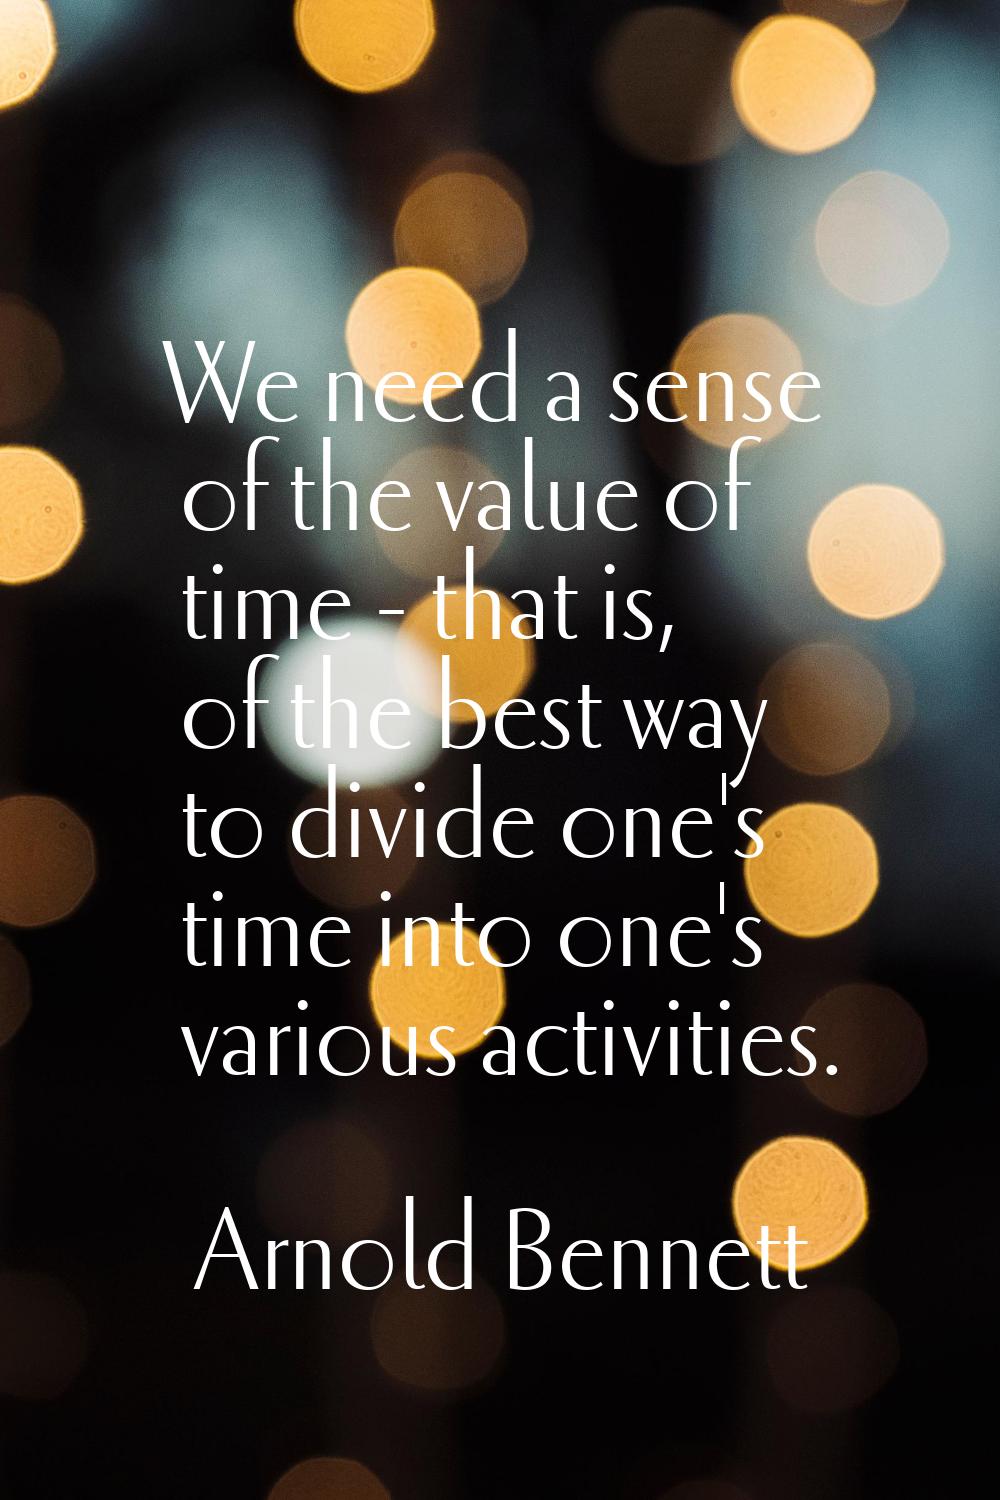 We need a sense of the value of time - that is, of the best way to divide one's time into one's var